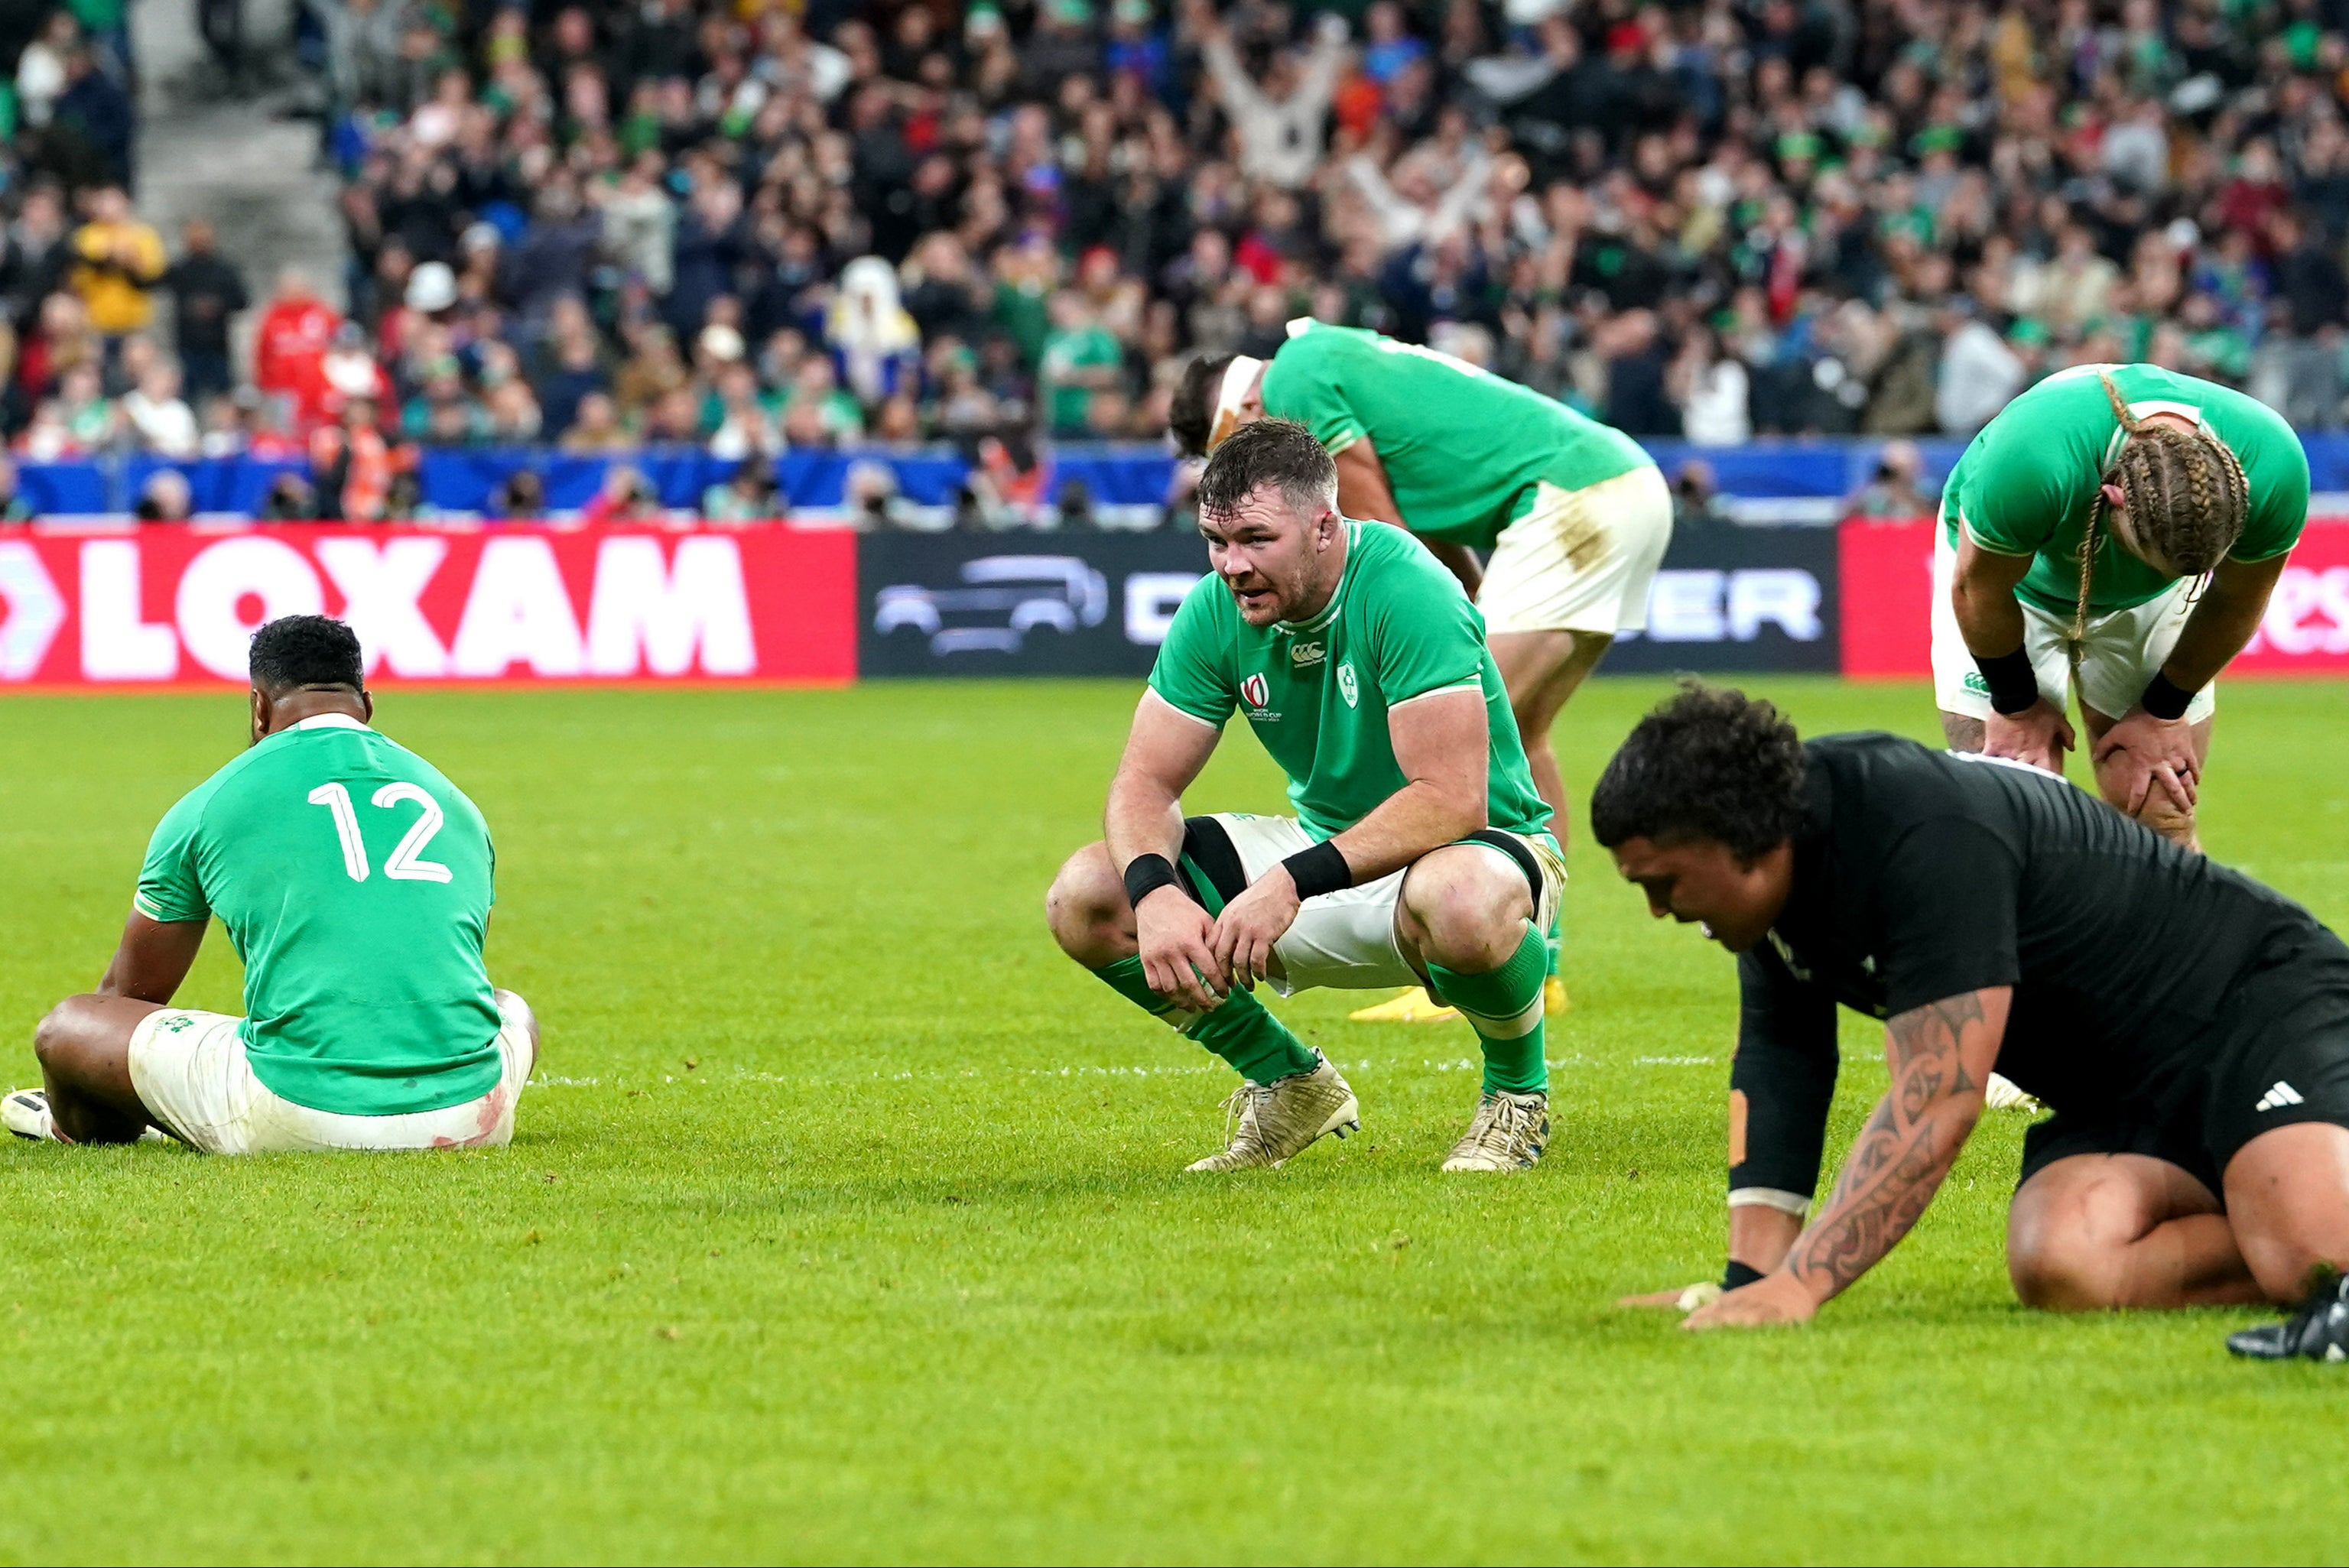 Ireland came up gut-wrenchingly short in their RWC quarter-final